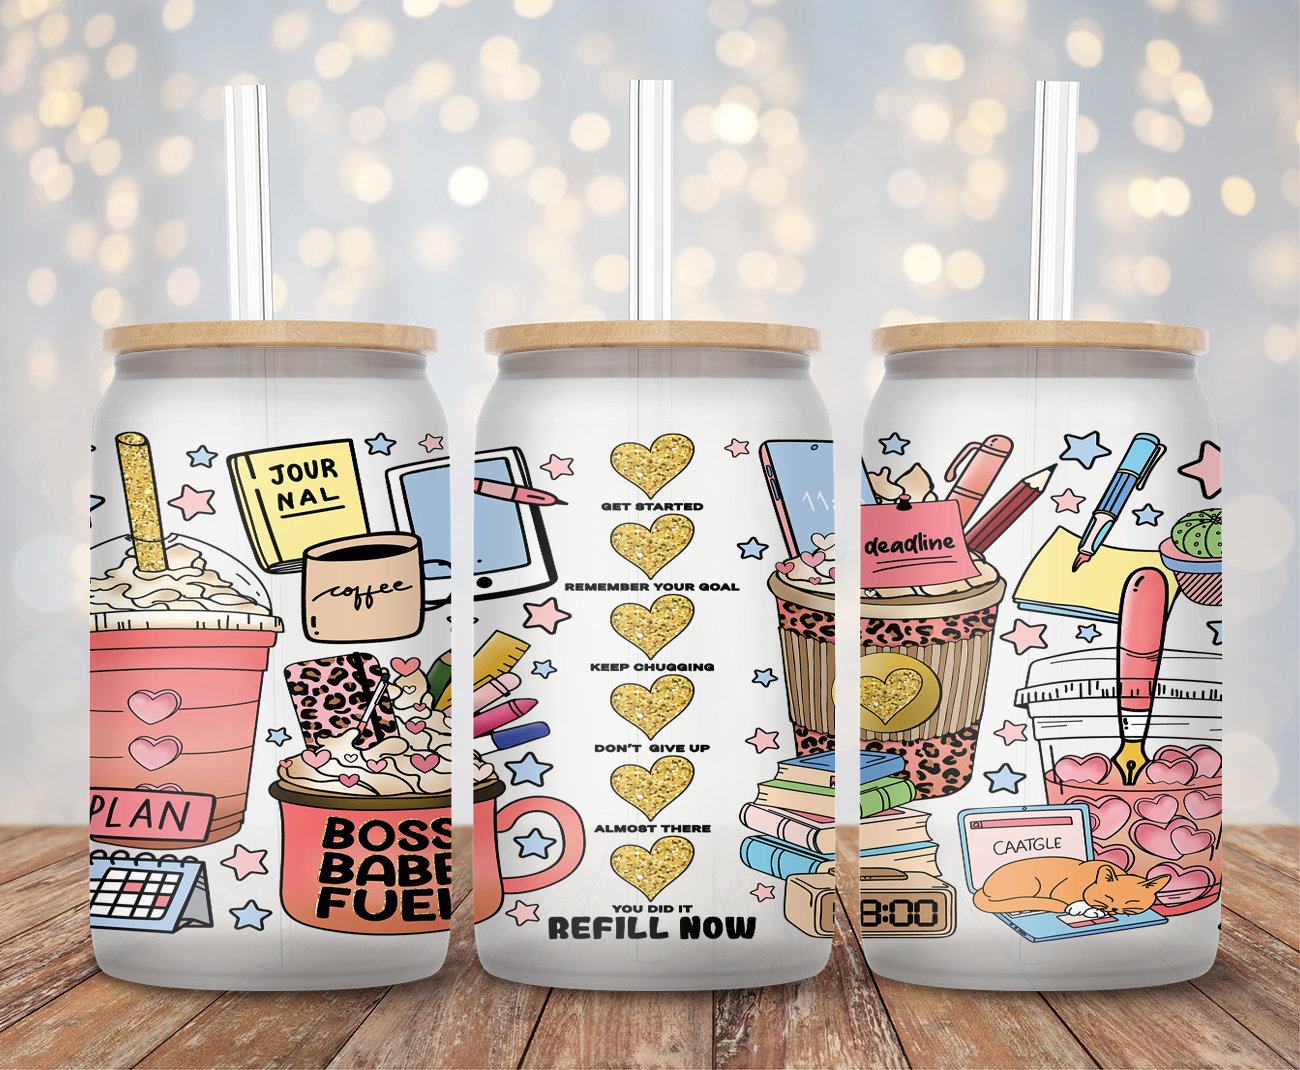 Boss Babe Fuel - 16oz Cup Wrap